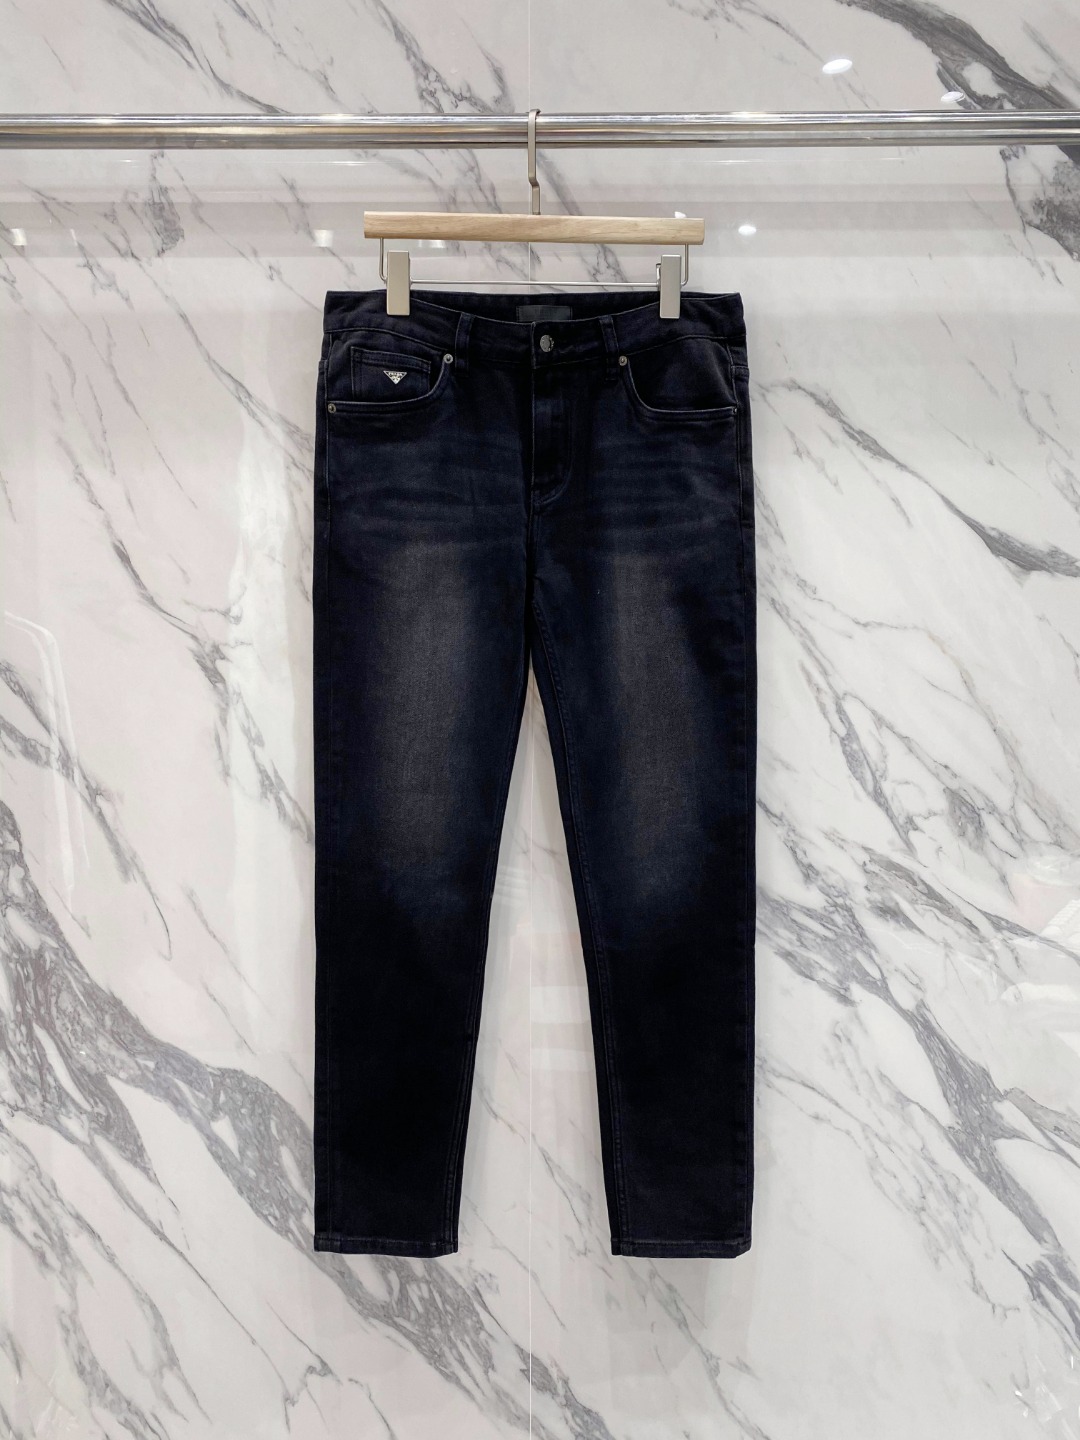 Prada Clothing Jeans Fall/Winter Collection